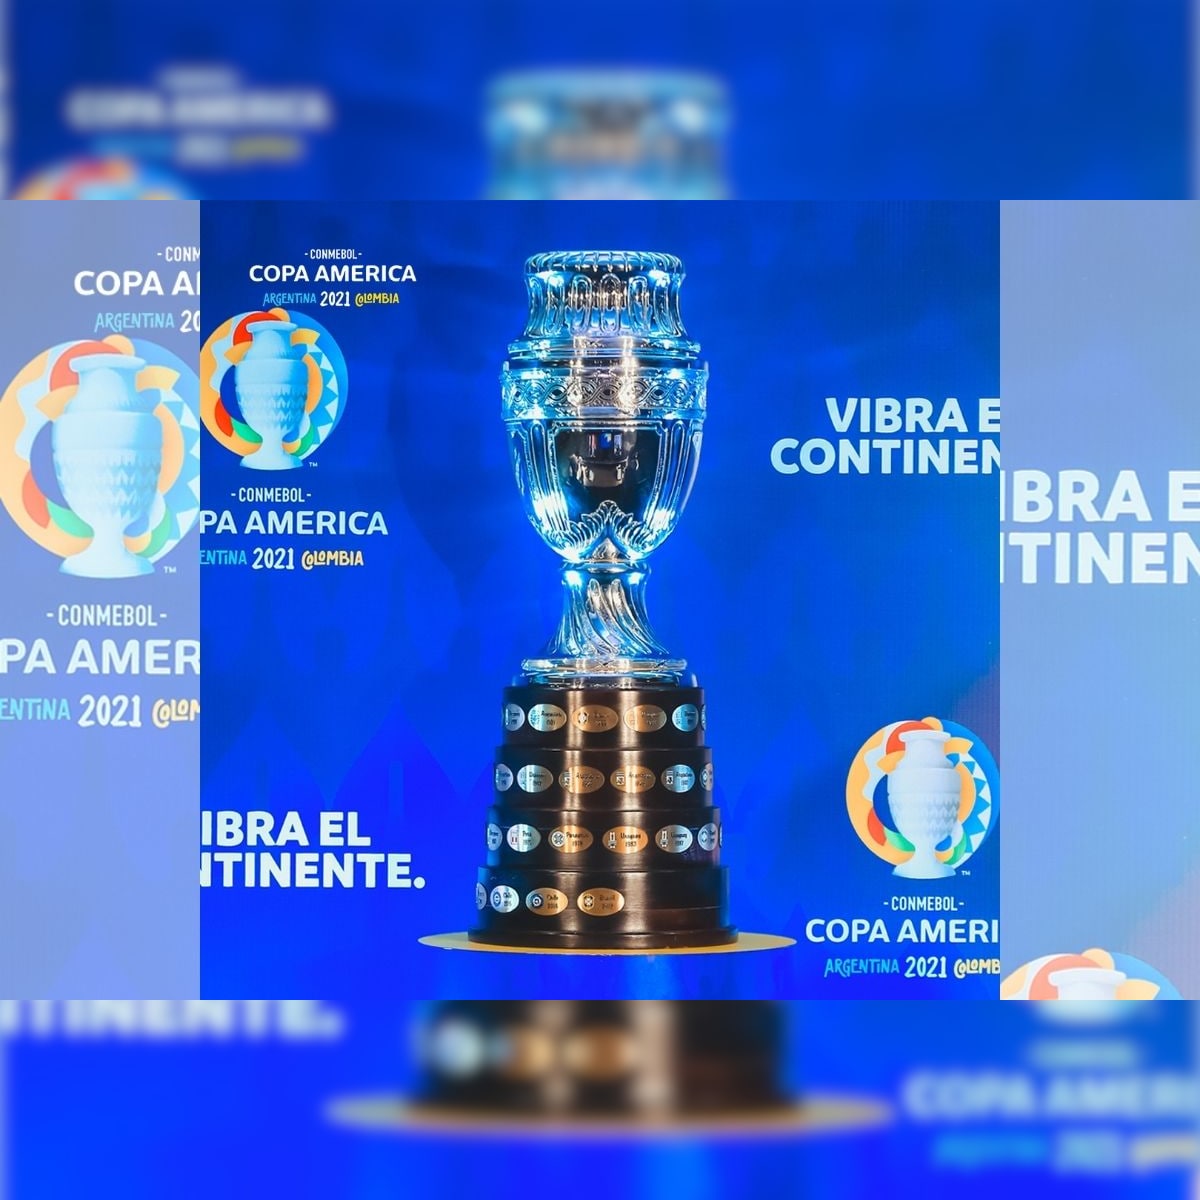 Copa America 2020 Fixtures vlr.eng.br